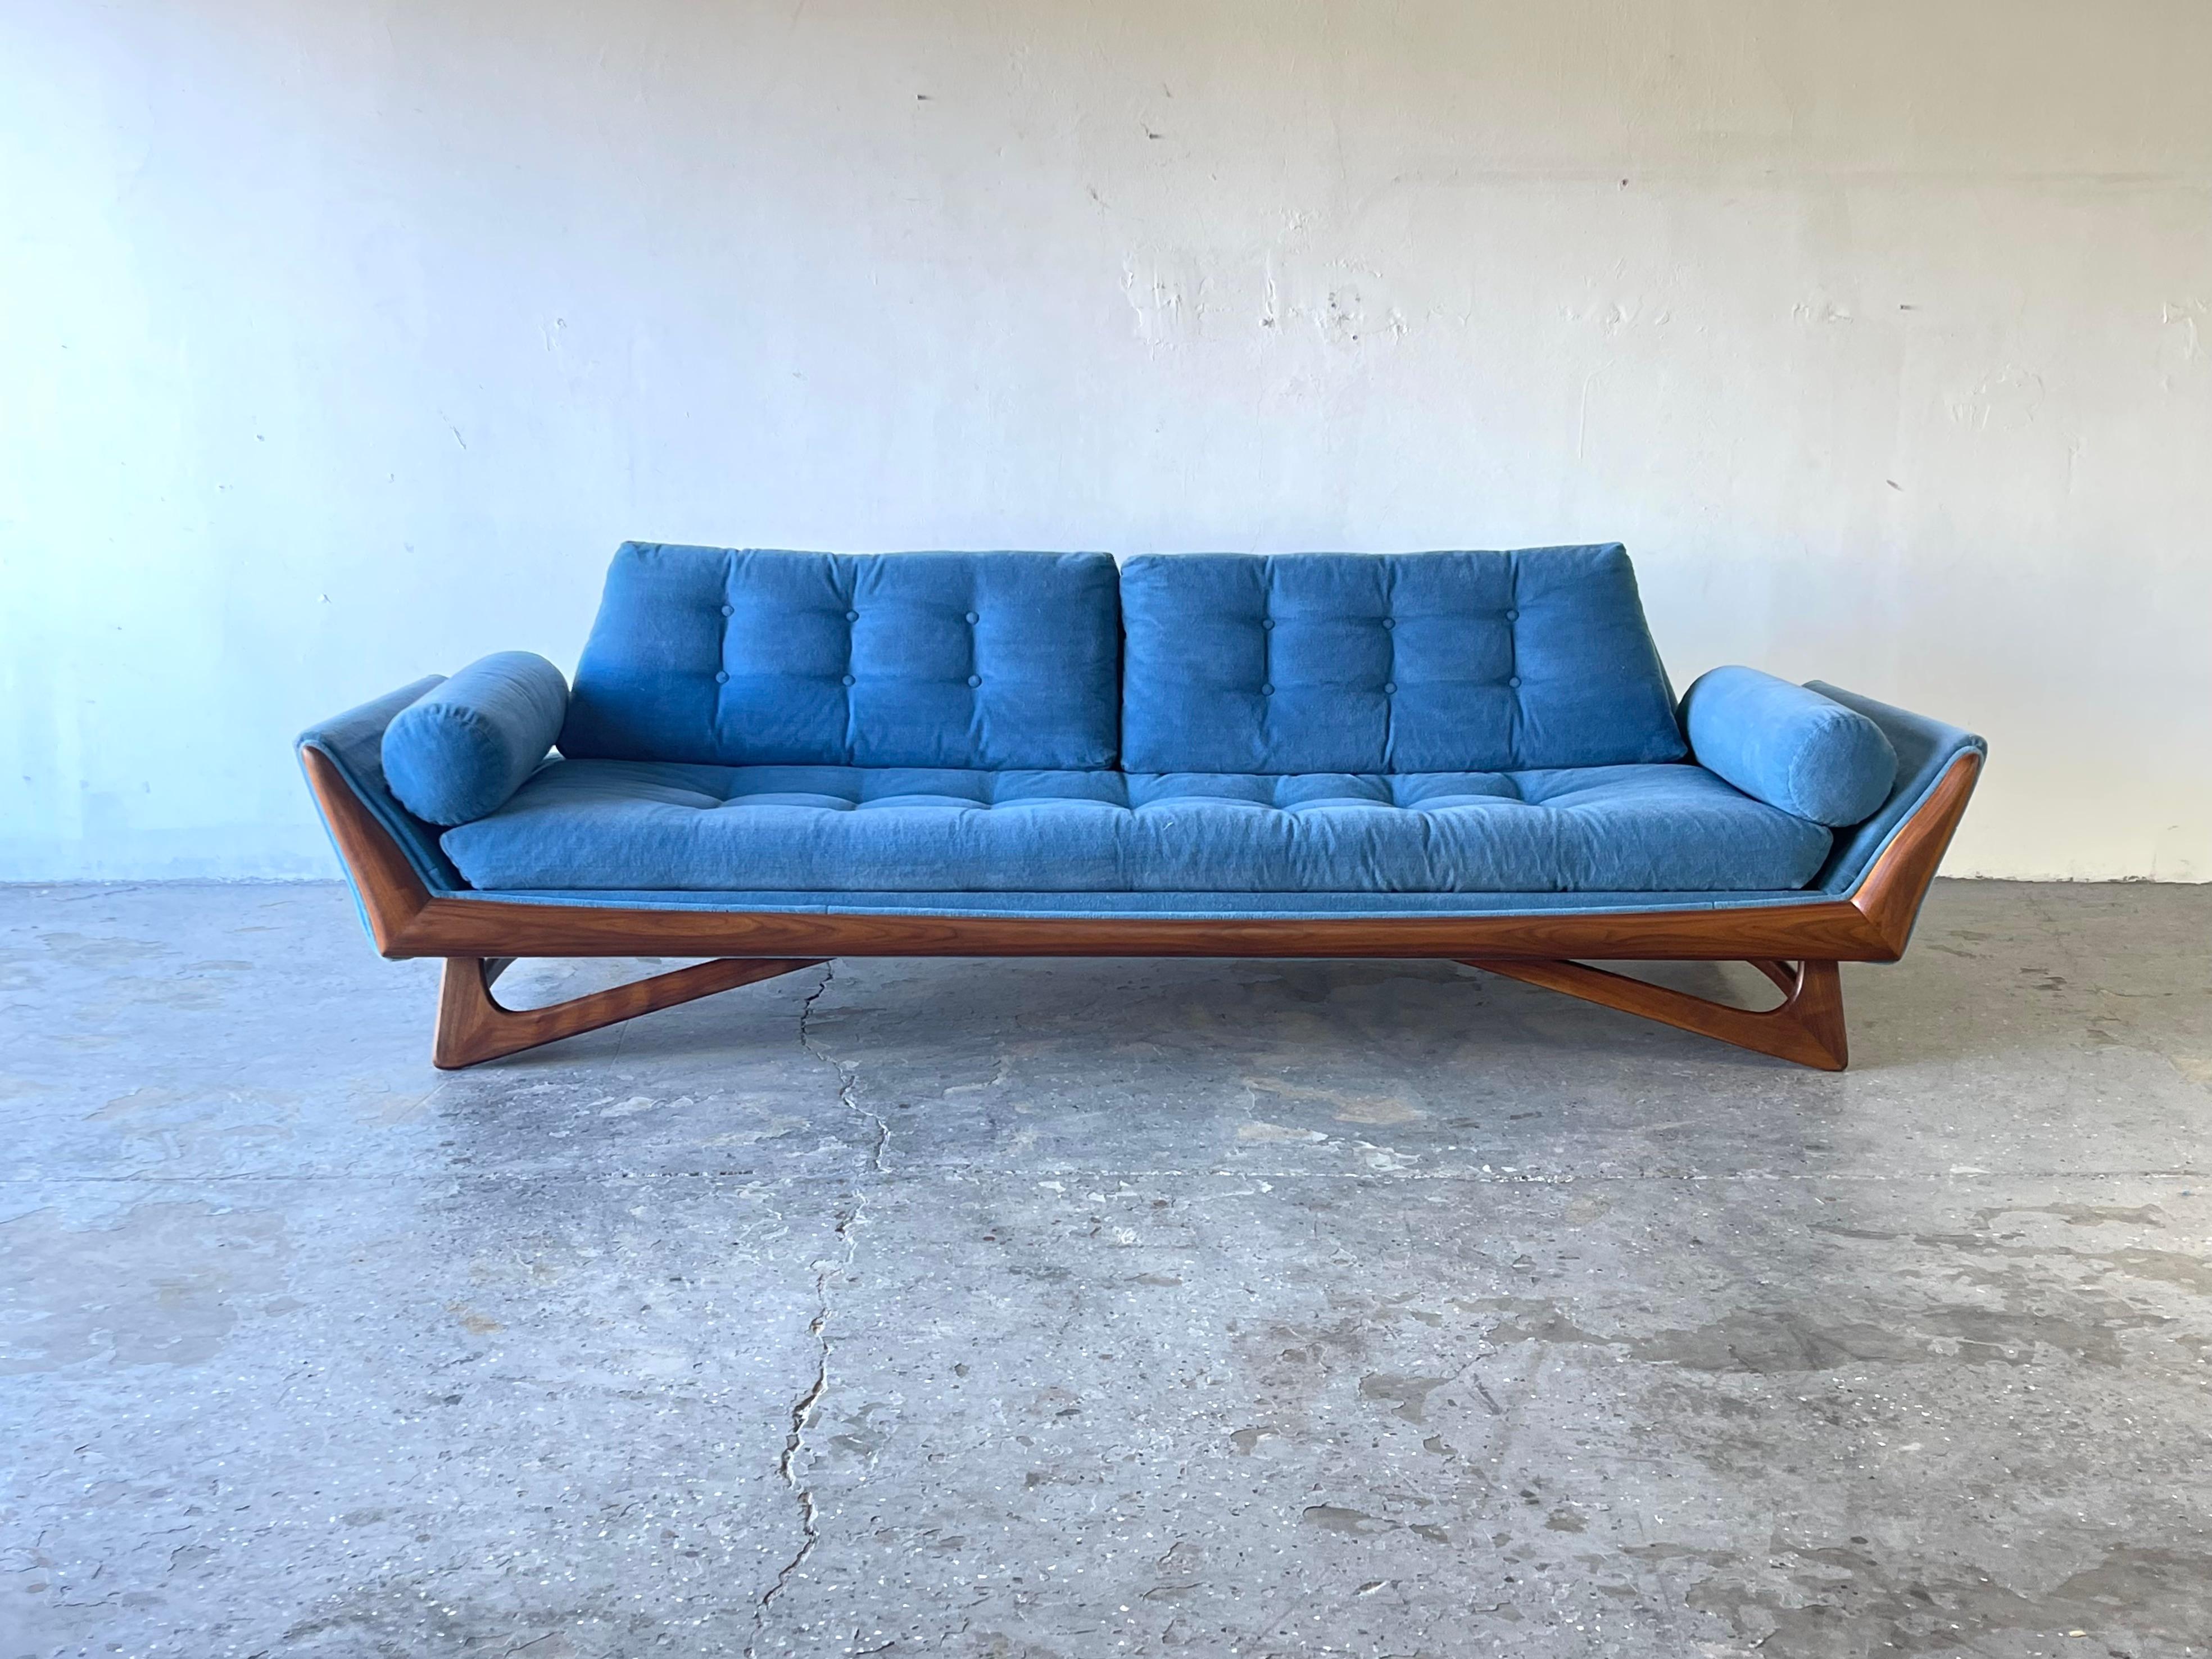 Rare sculptural Adrian Pearsall sofa for Craft Associates, . This is an unusual model with walnut base see how the legs go all the way to the back.

All walnut frame has been refurbished including joints, legs and frame. Fabric is not original but